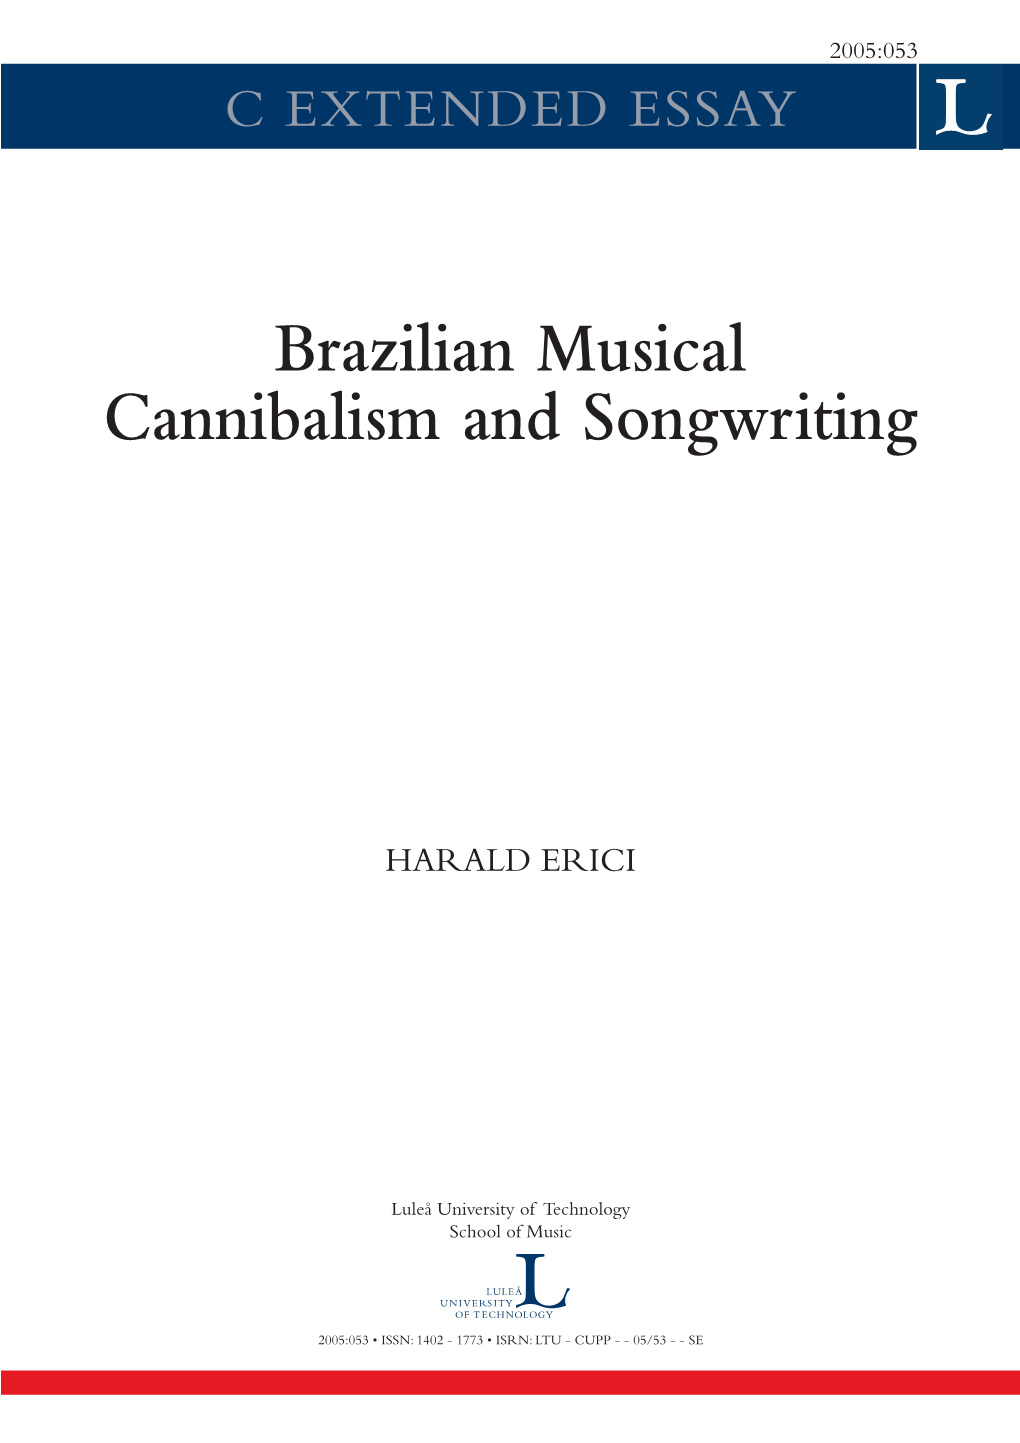 Brazilian Musical Cannibalism and Songwriting